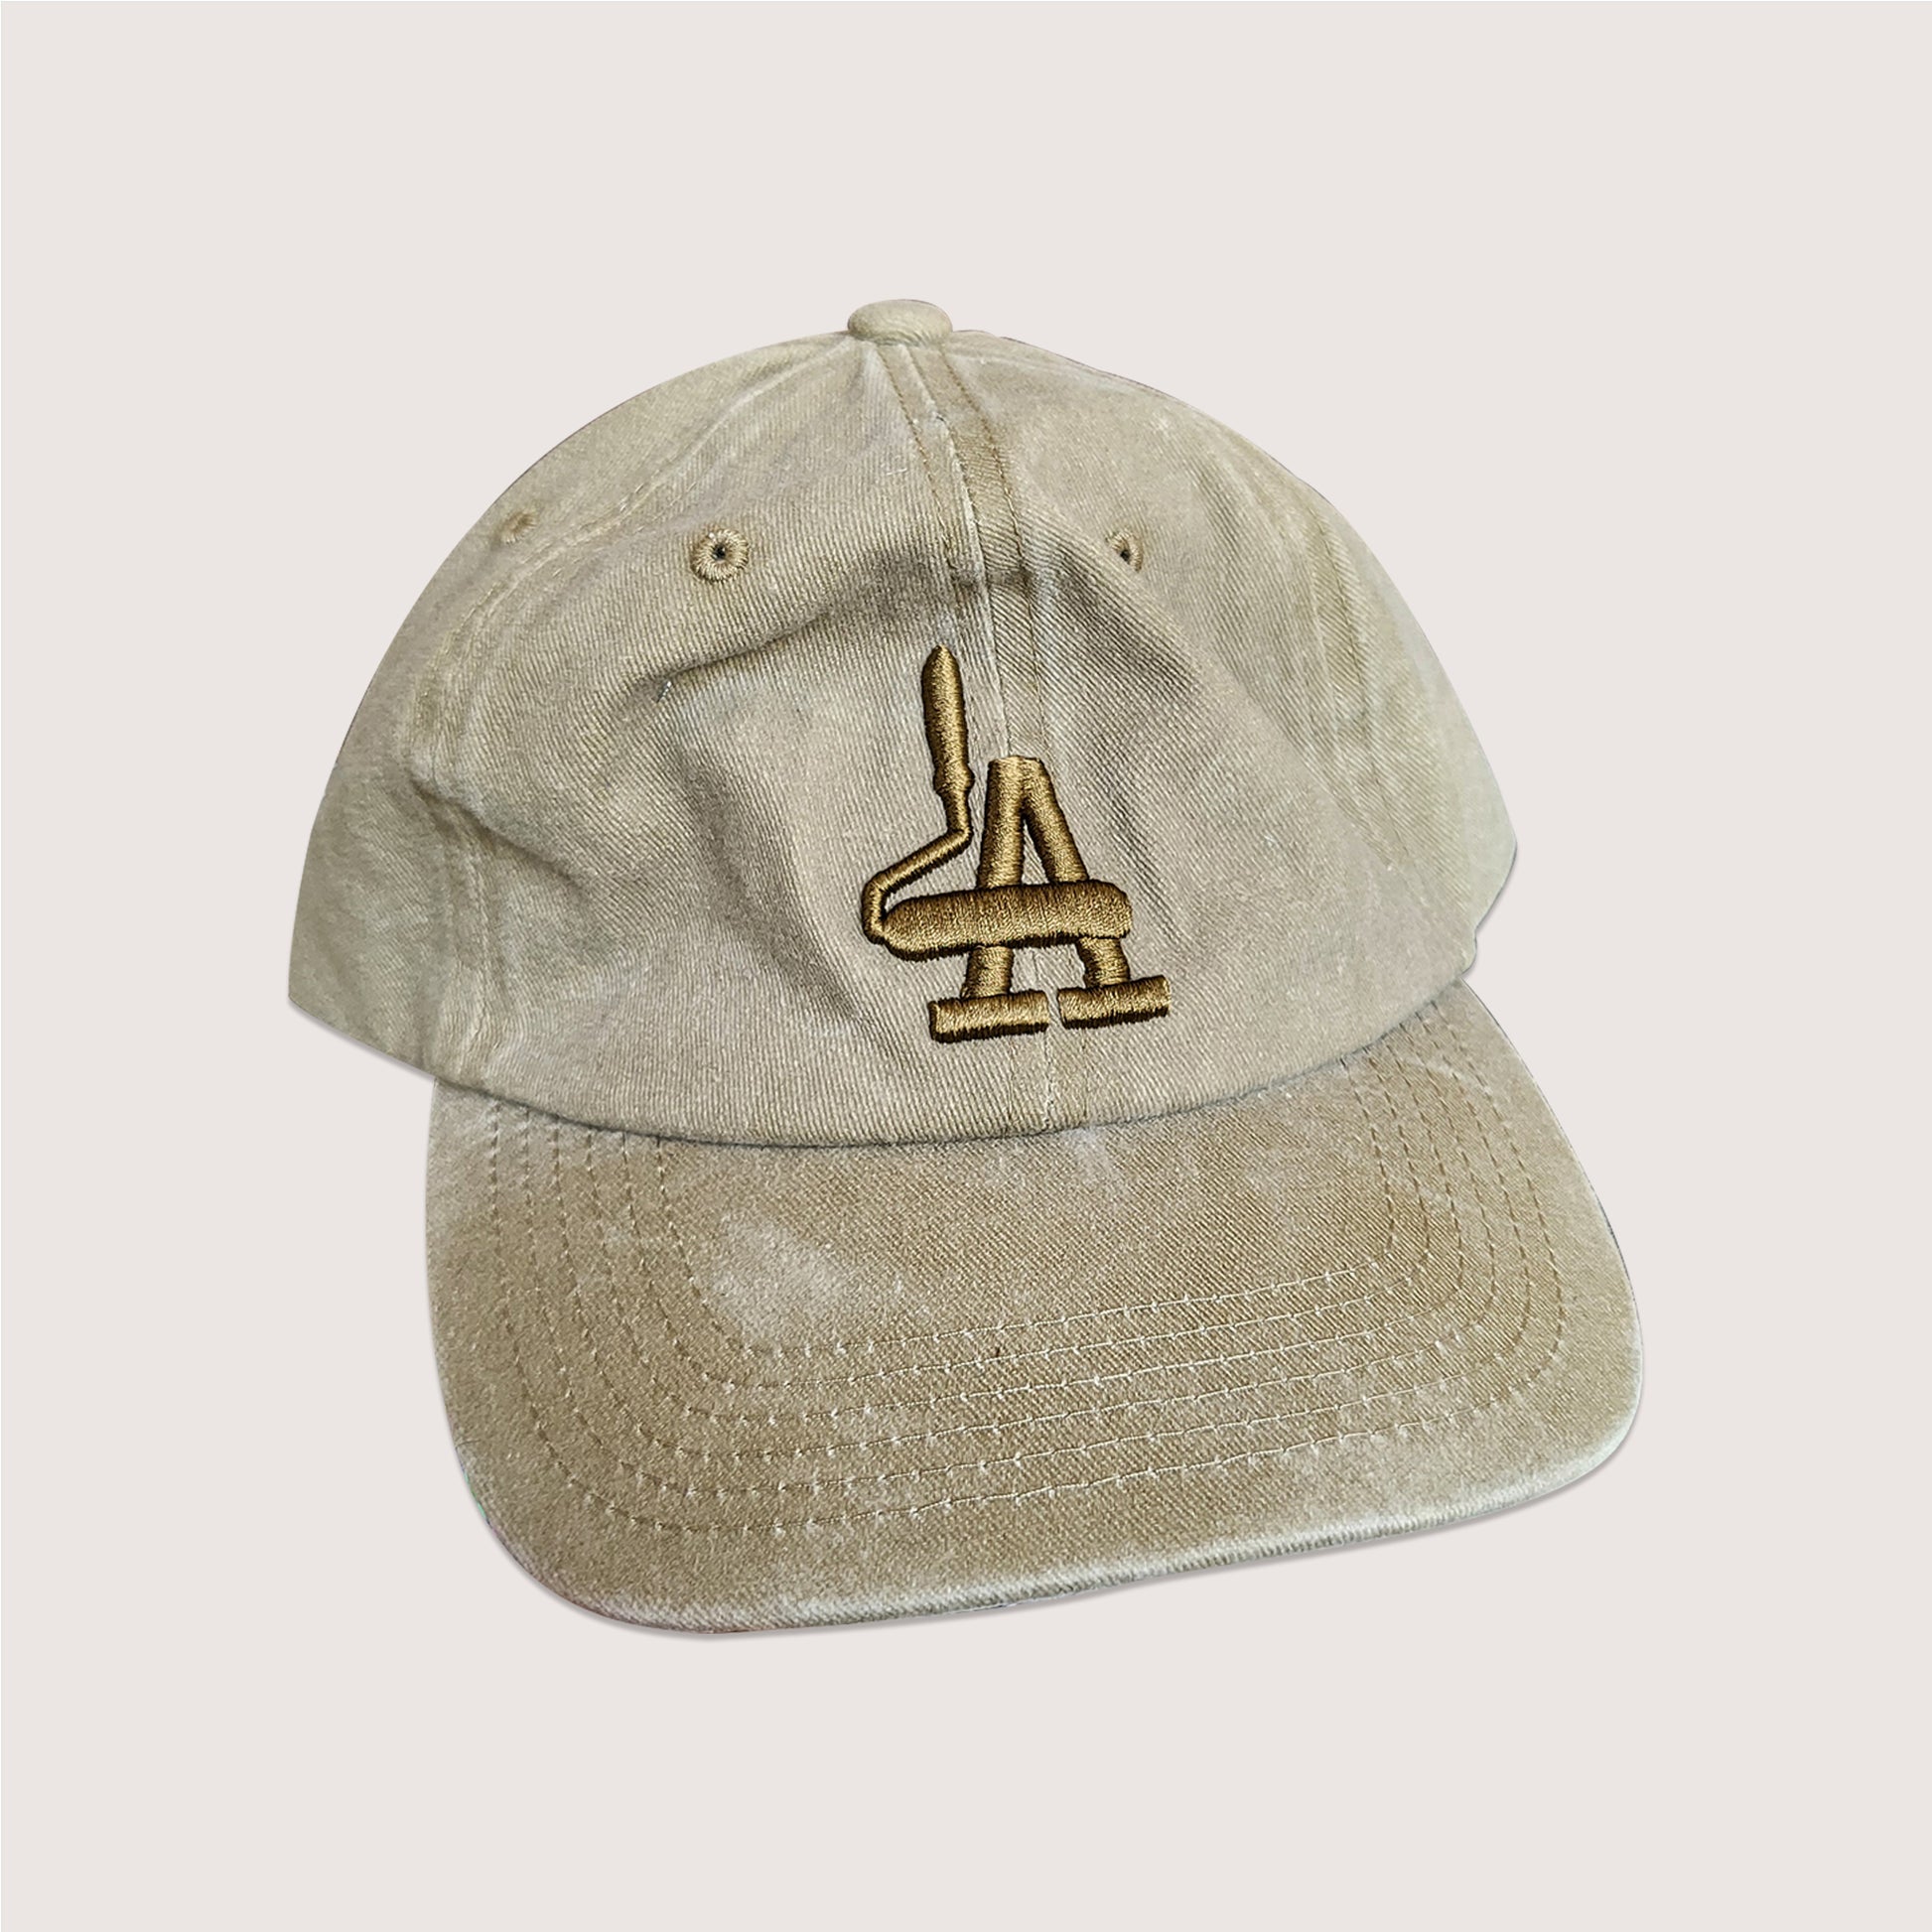 Locally branded unstructured cap in khaki brown with white puff embroidery detail.